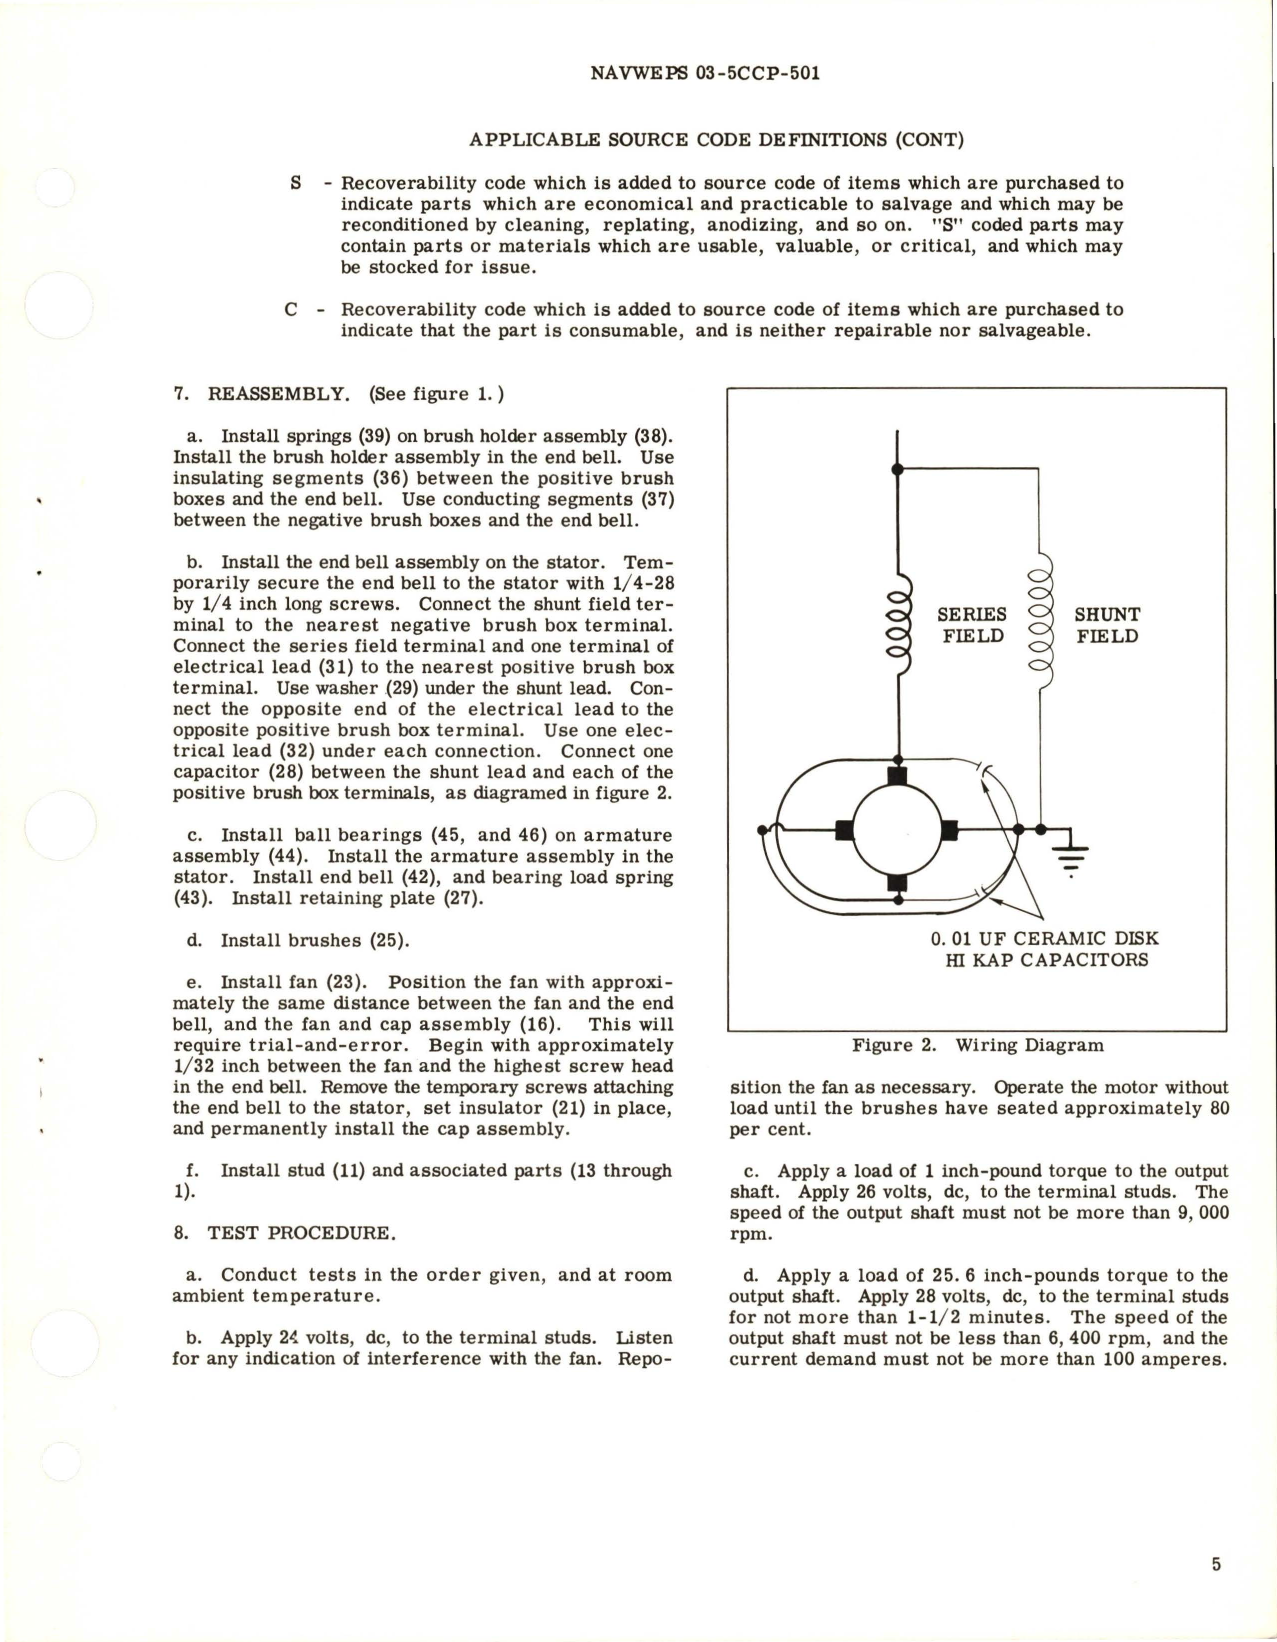 Sample page 5 from AirCorps Library document: Overhaul Instructions with Parts Breakdown for Direct Current Motor - Parts D479 and D479-1